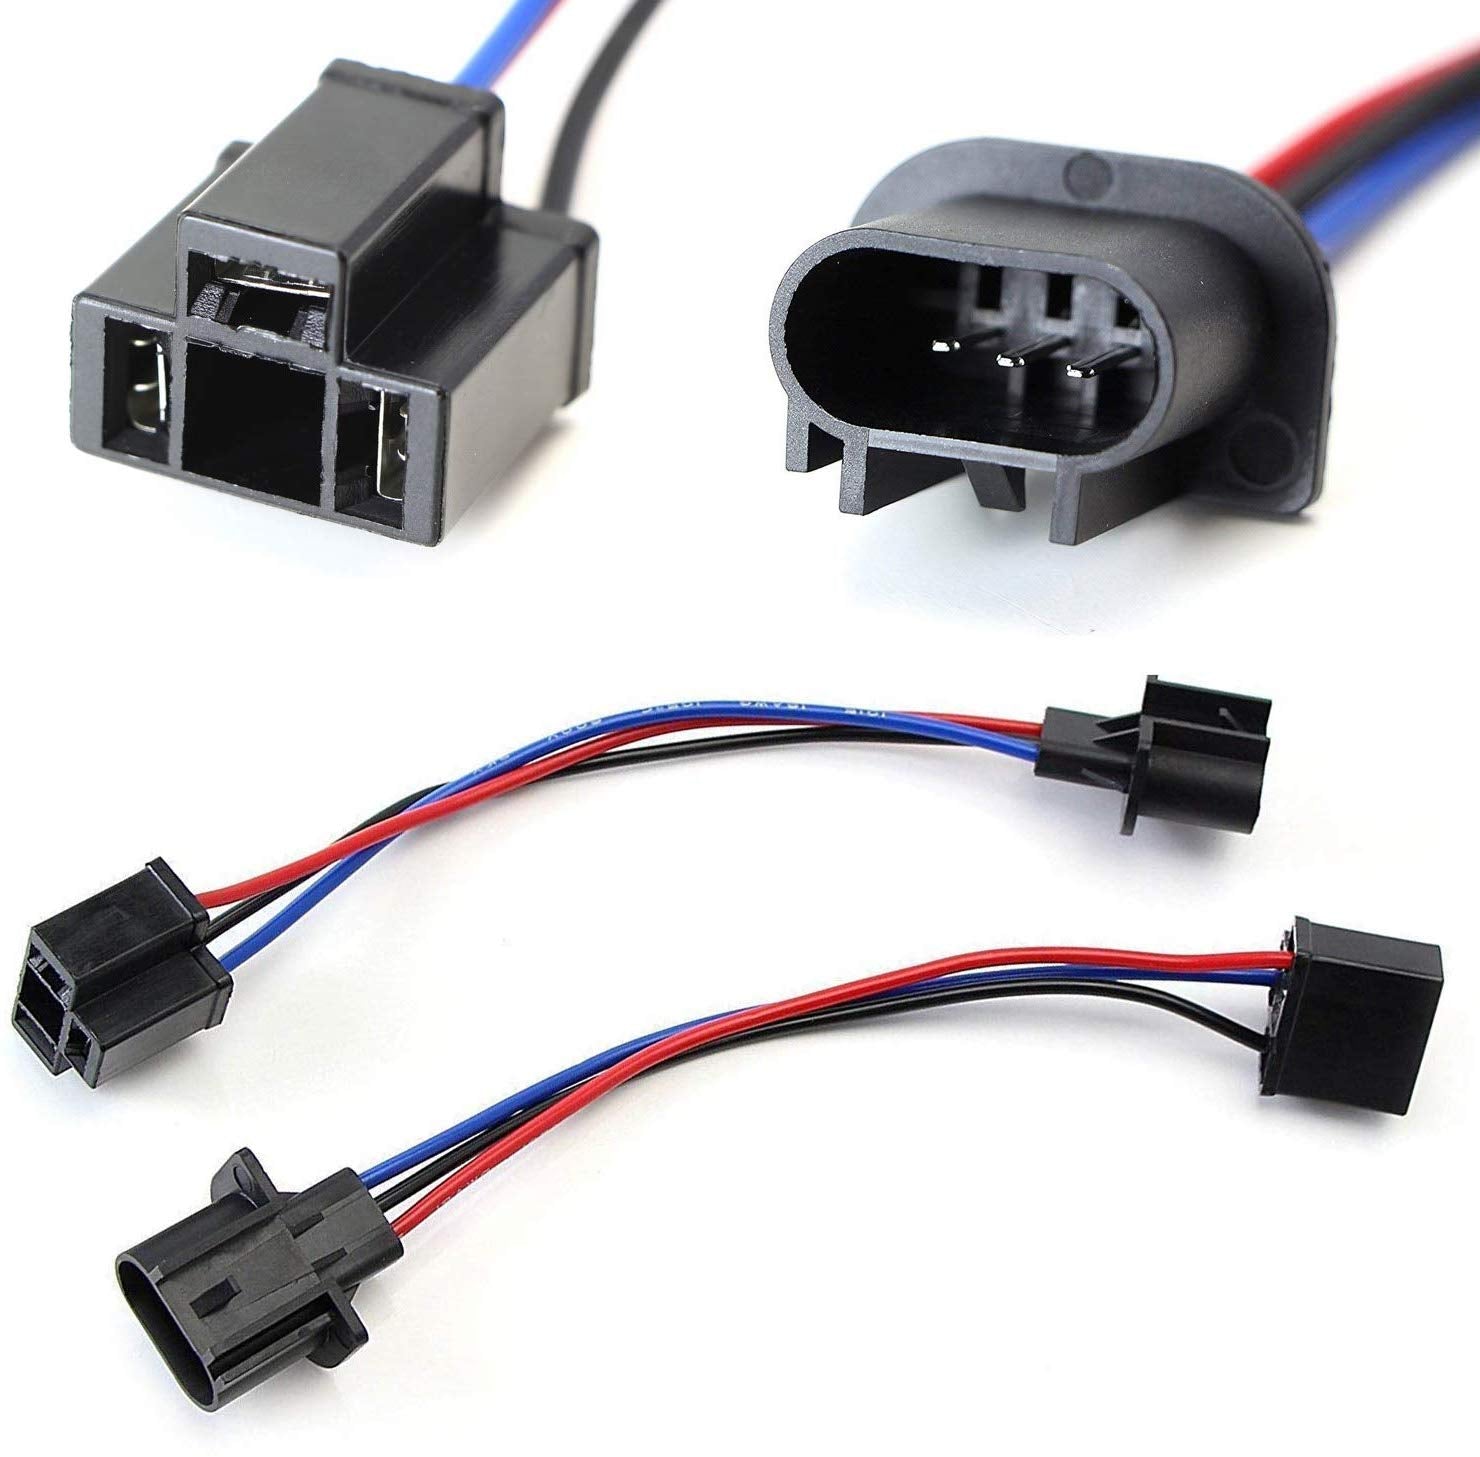 iJDMTOY (2) H13 9008 To H4 9003 Pigtail Wire Wiring Harness Adapters For H13/H4 Headlight Conversion Retrofit